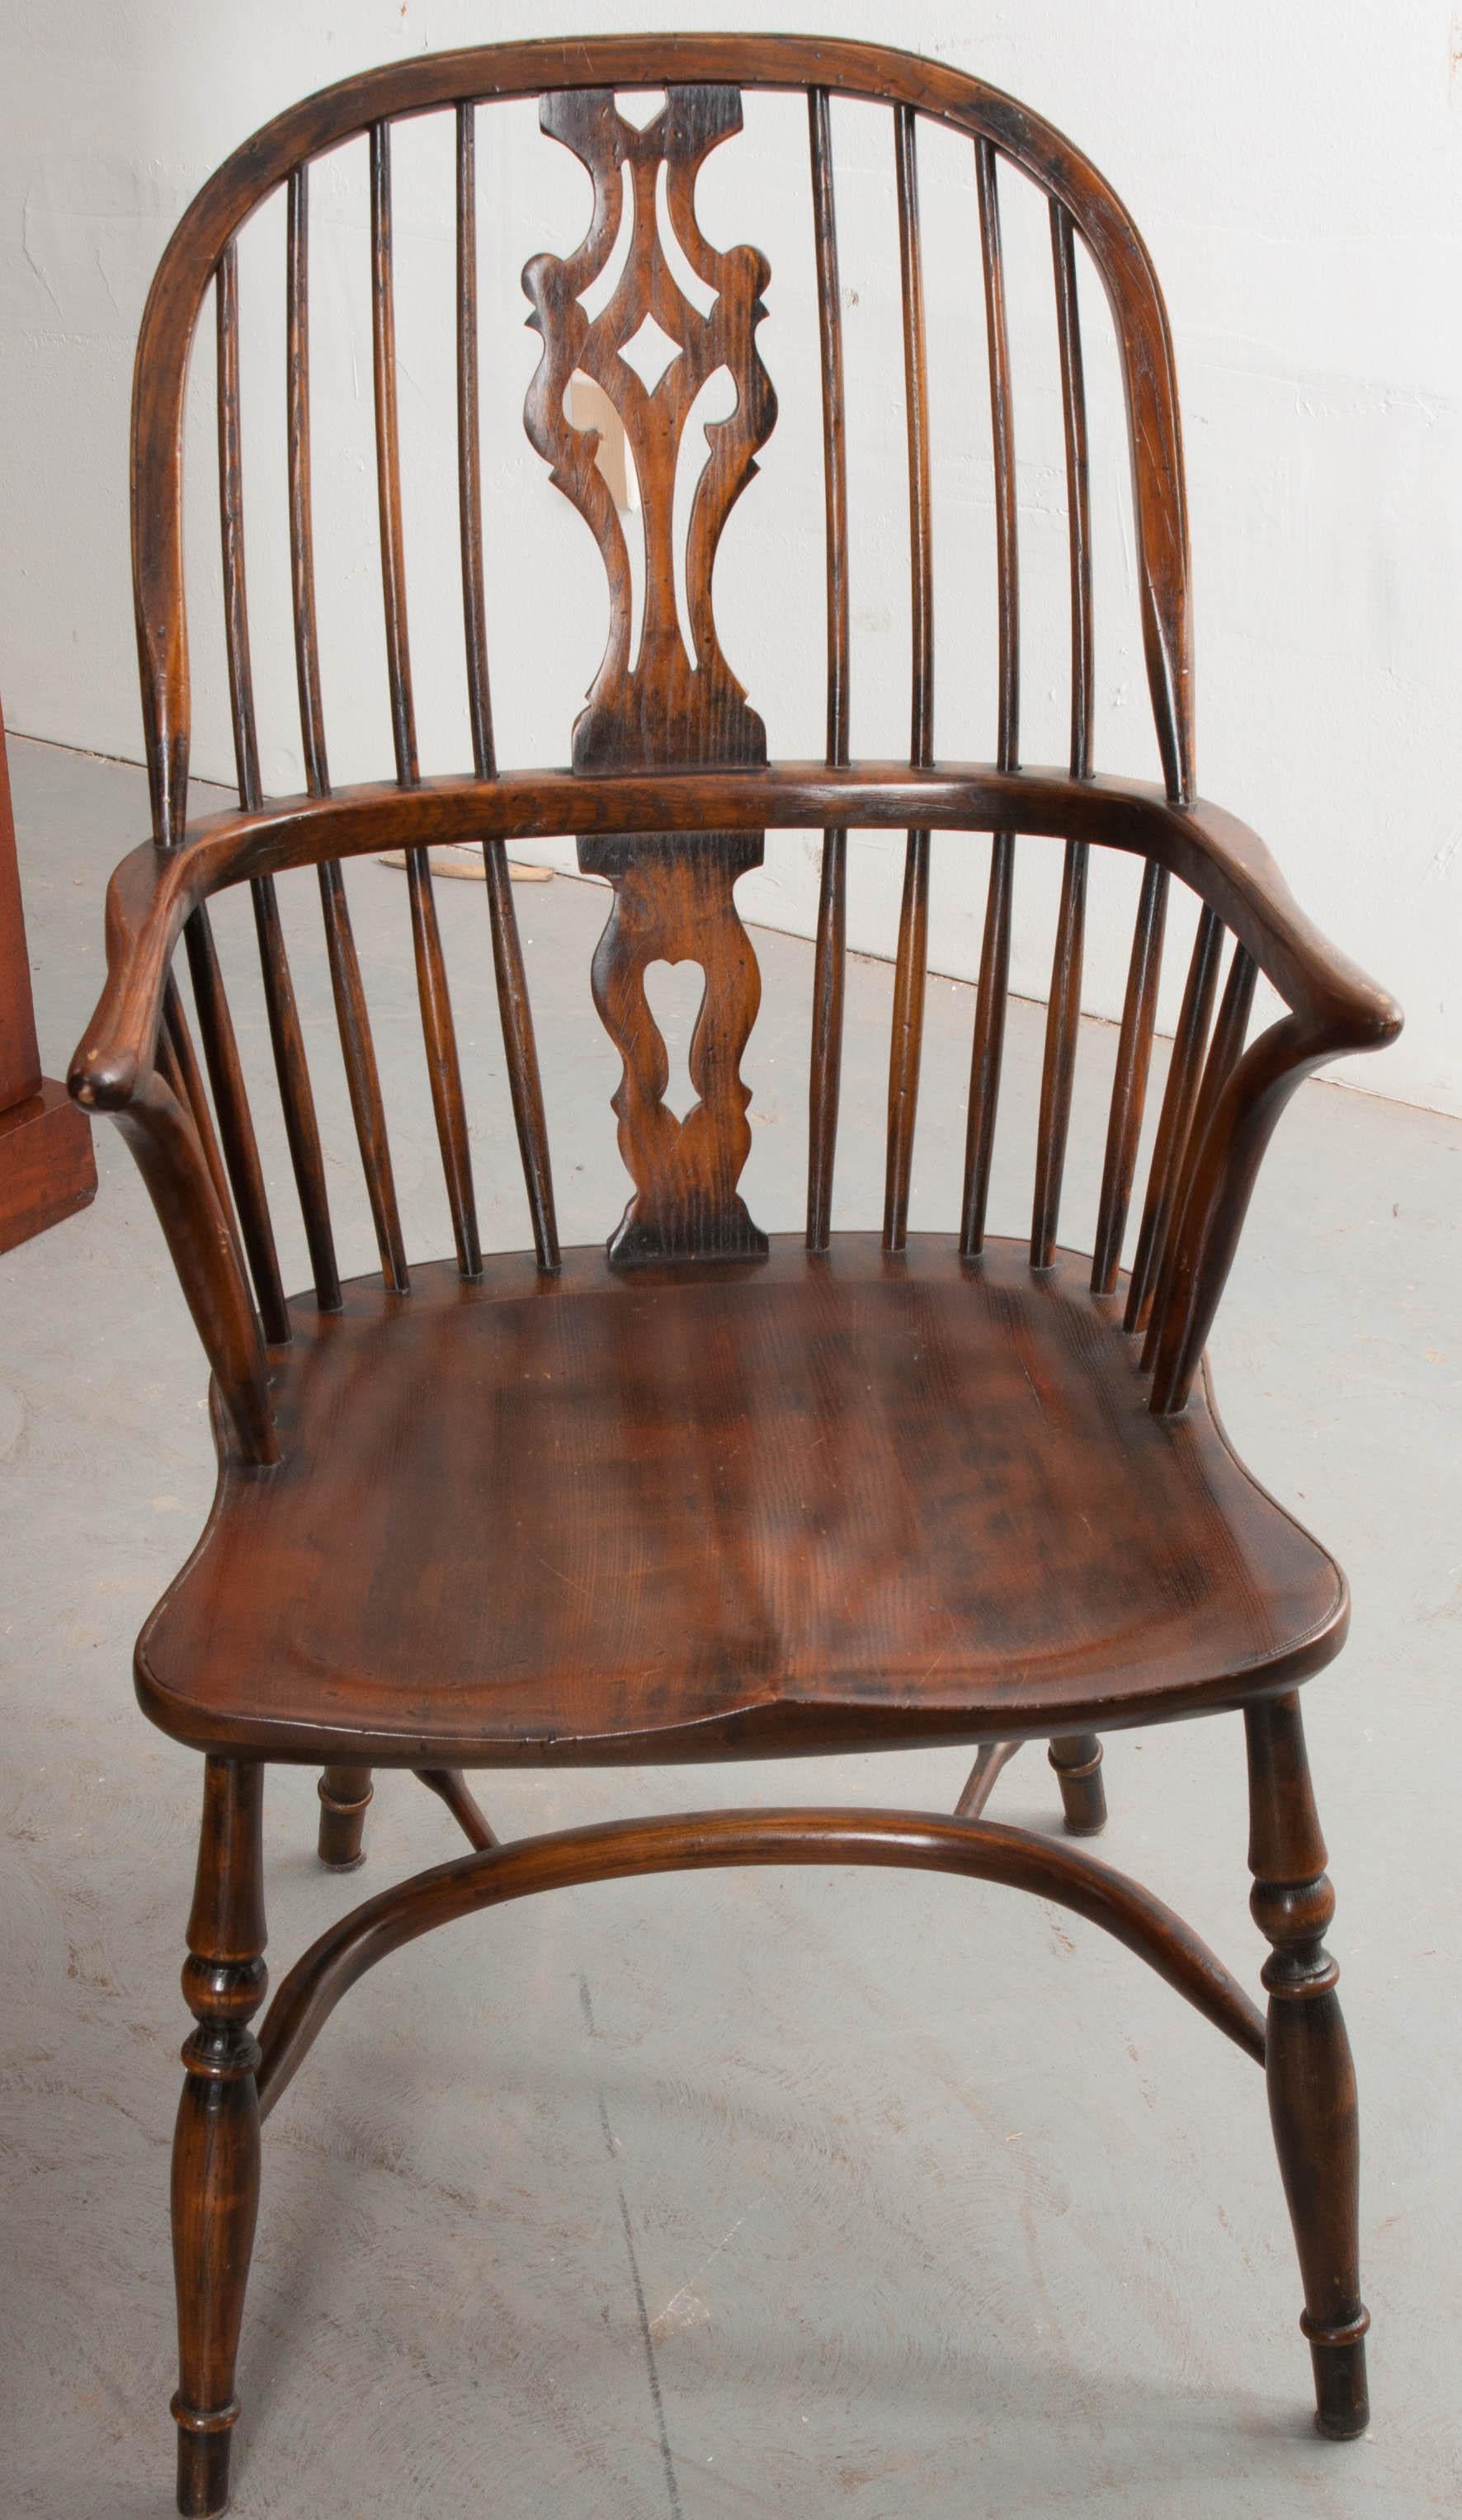 This fine set of Windsor style dining chairs was made in the traditional English style using beautifully toned oak. The chairs were made in the 1950s as reproductions, and have acquired a patina of their own over the past sixty-plus years. The